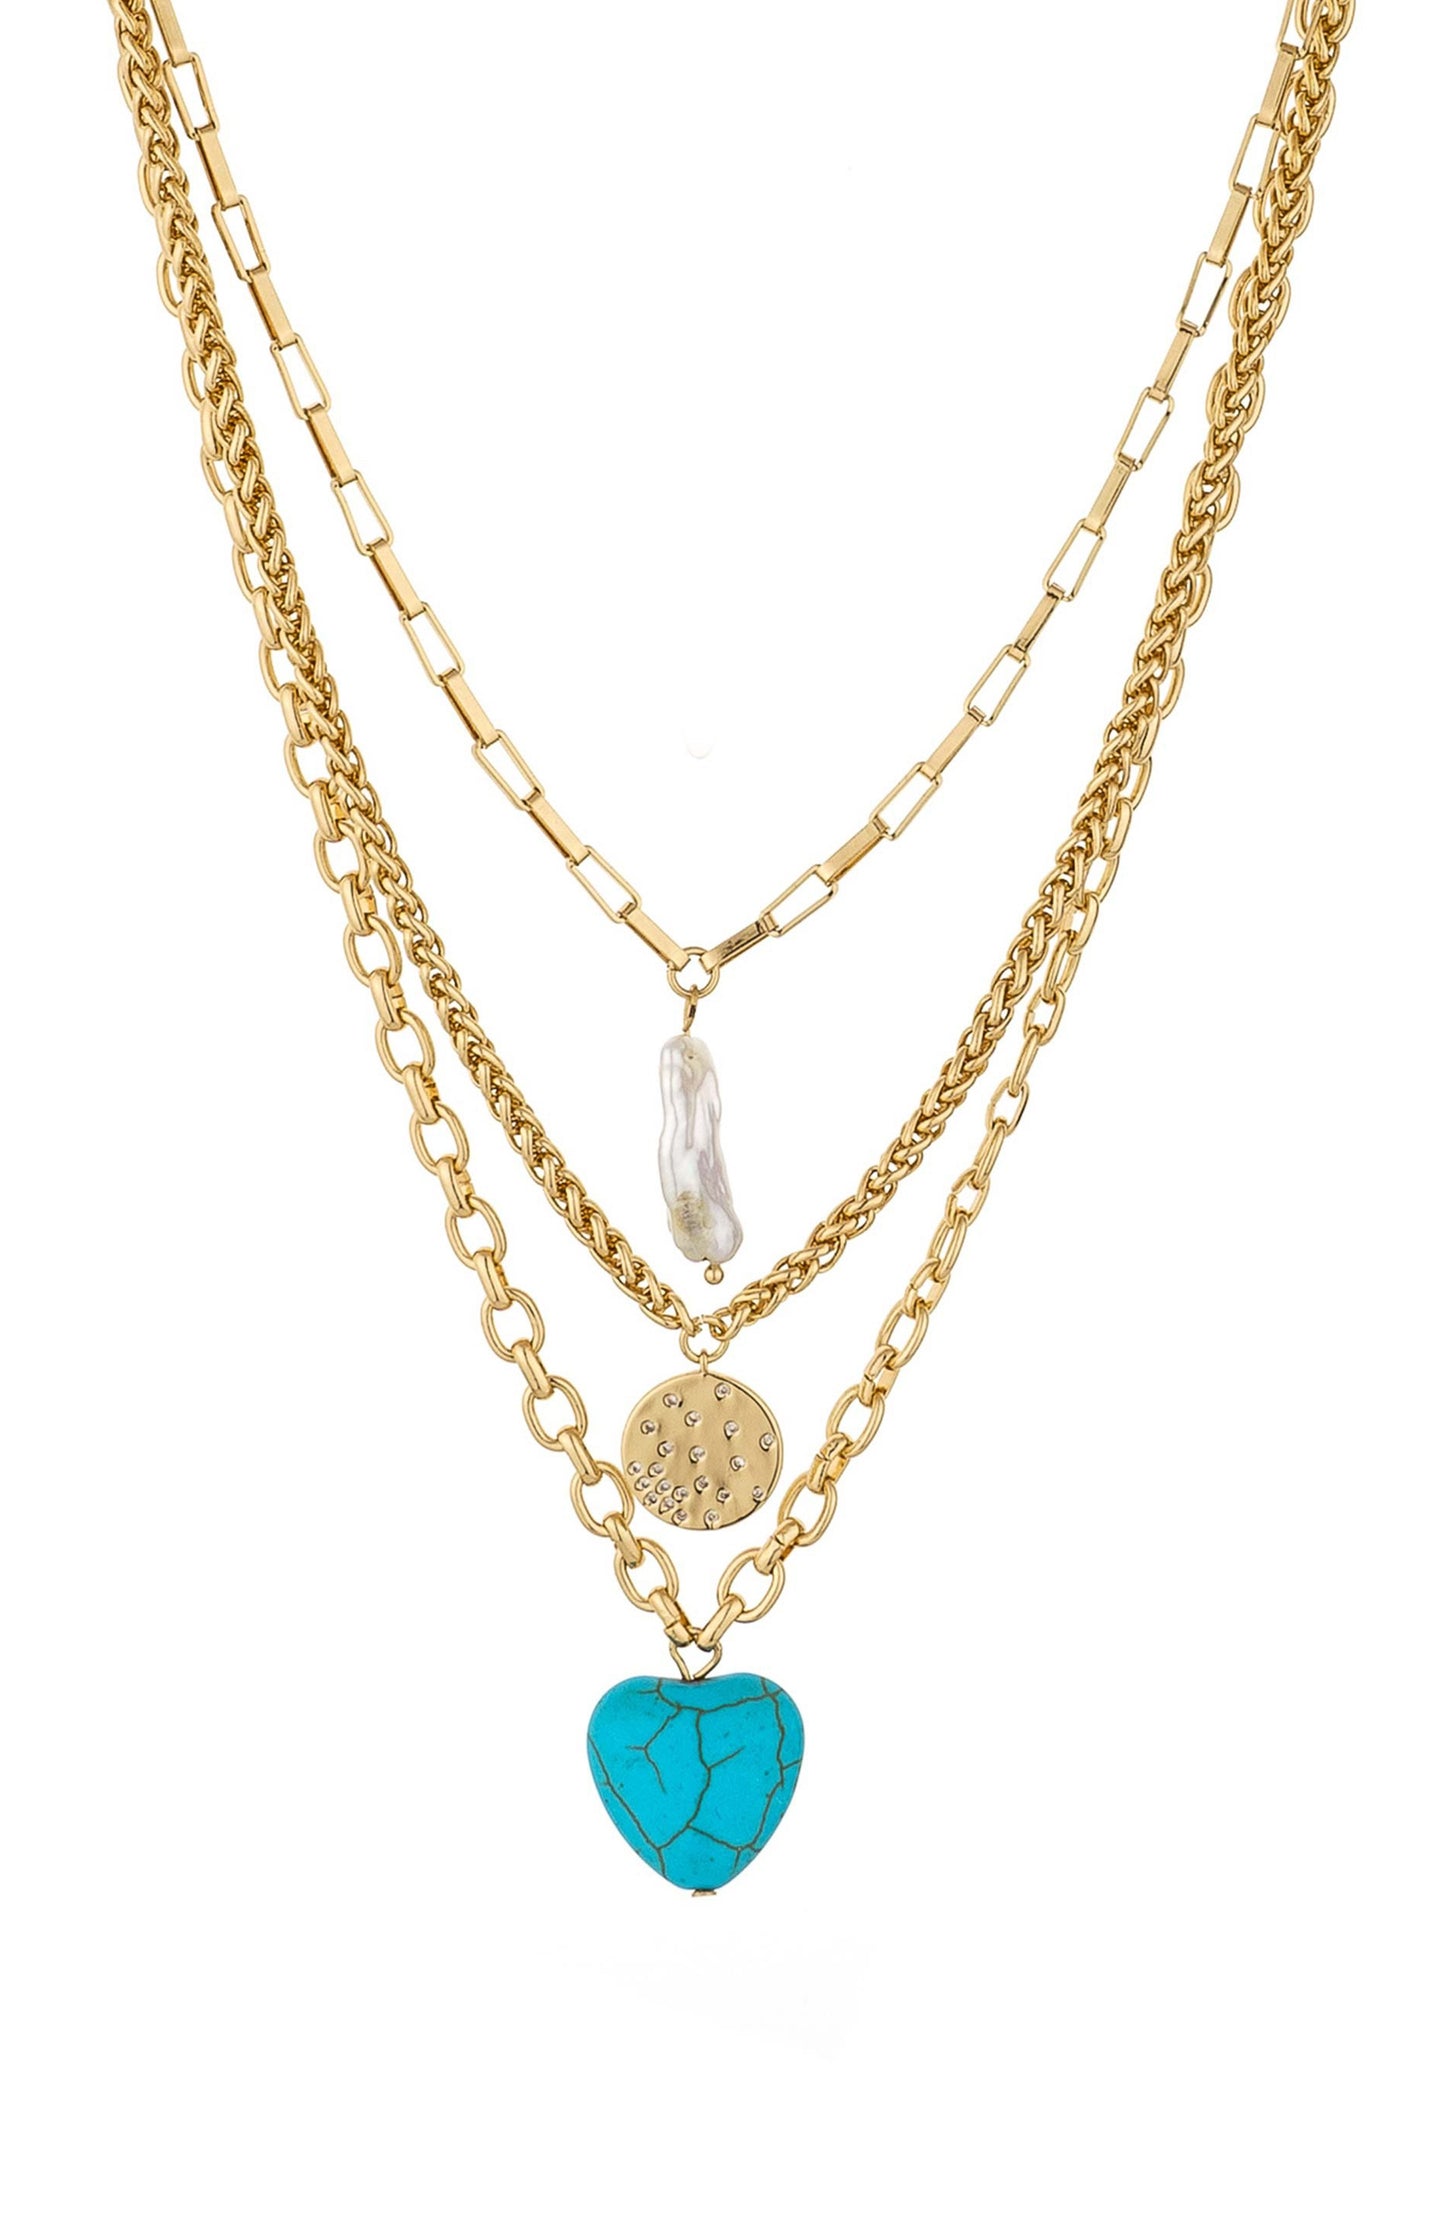 The Malibu Turquoise, Coin, and Pearl 18k Gold Plated Necklace Set on white close